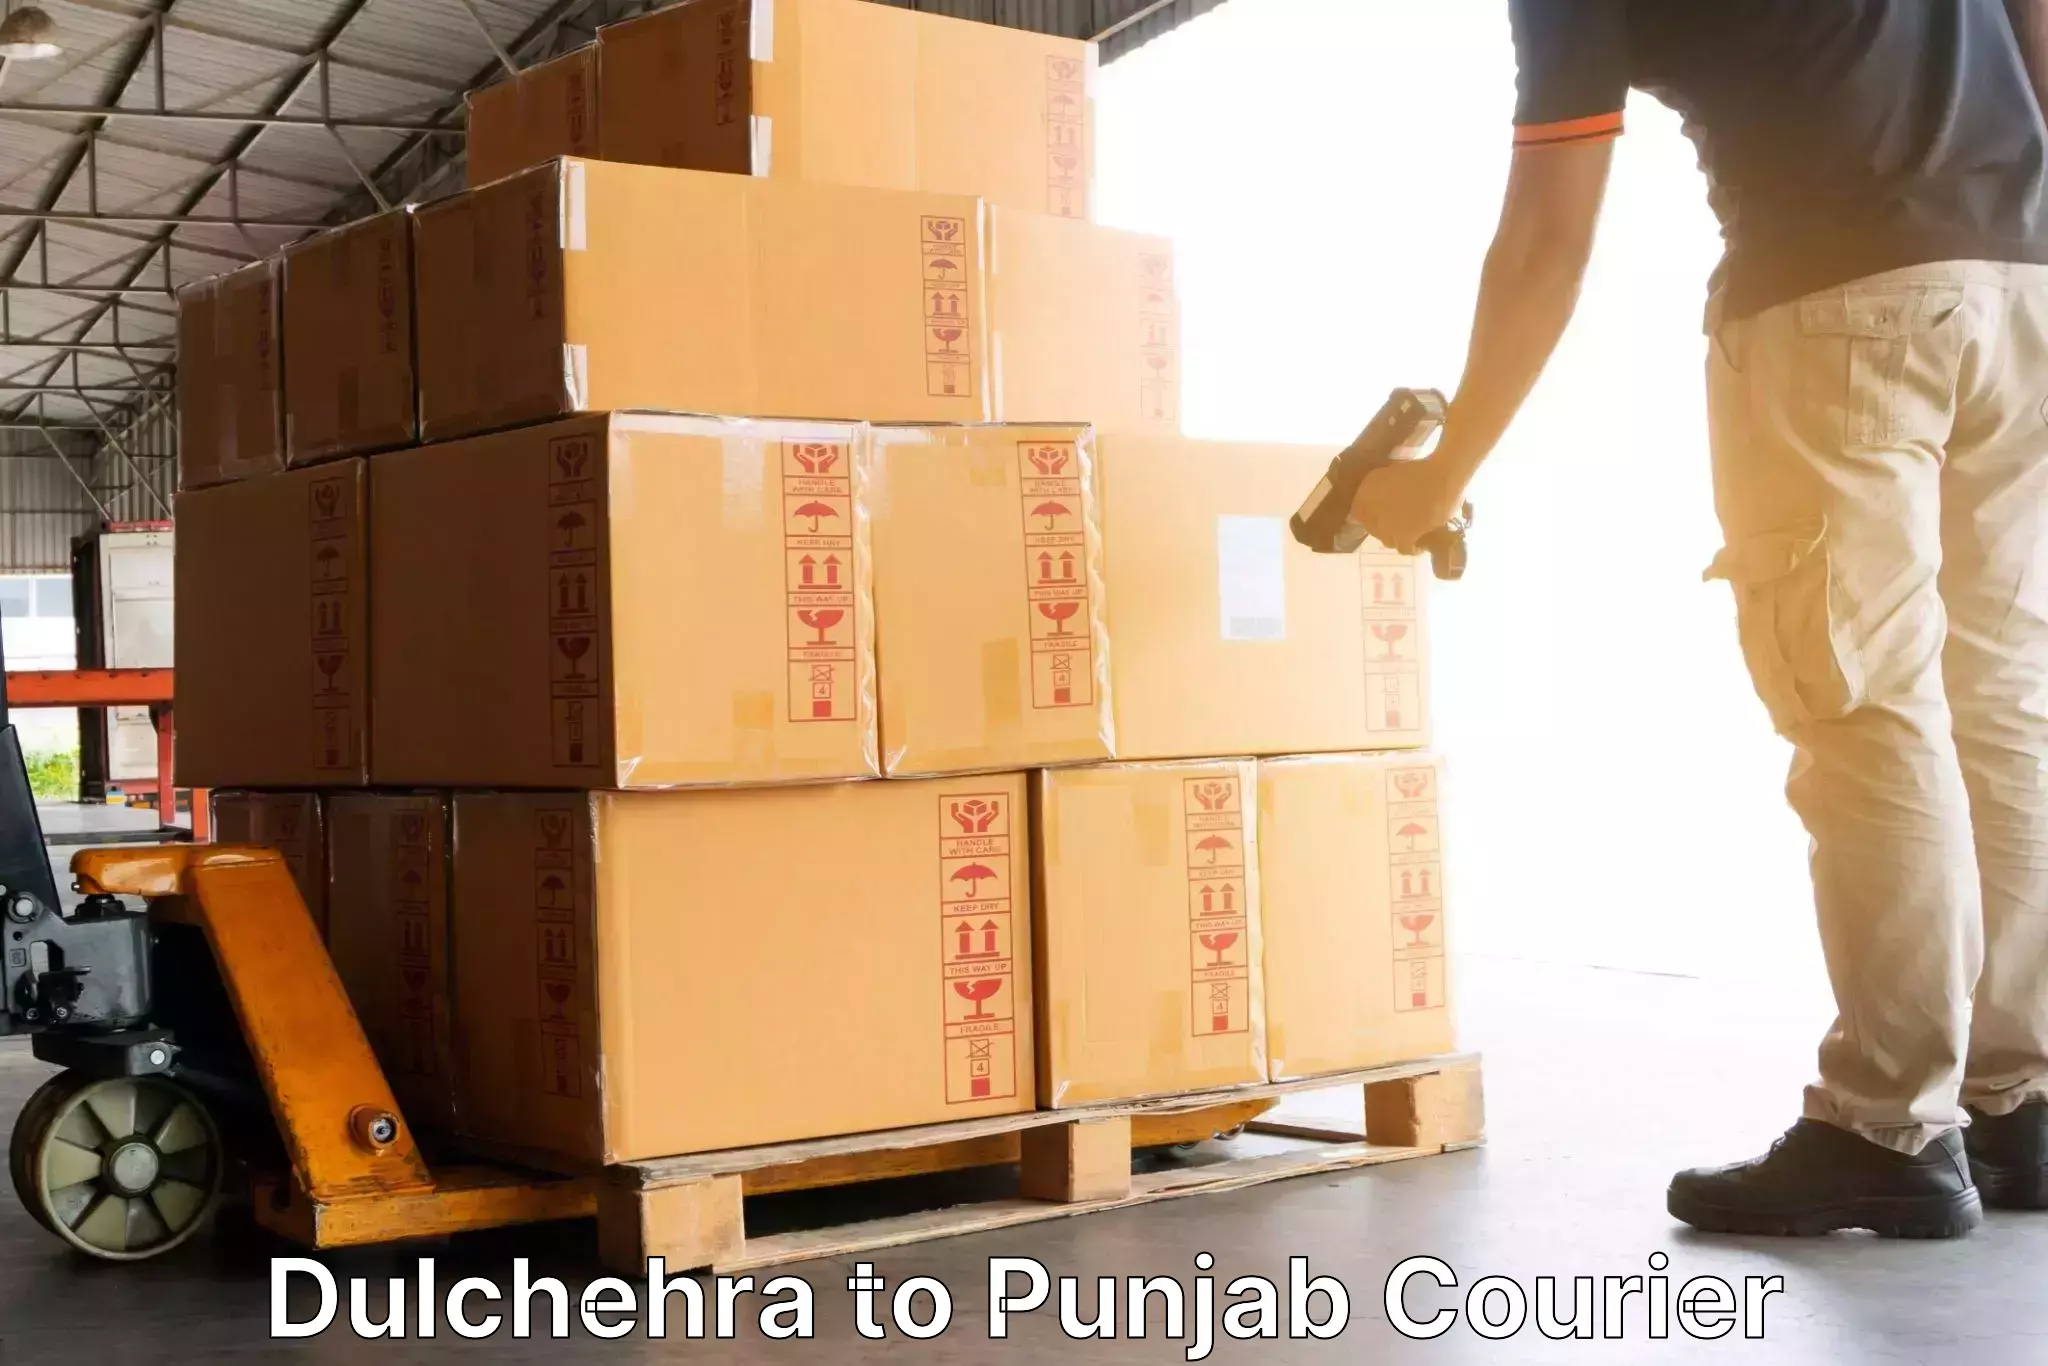 Personal courier services Dulchehra to Punjab